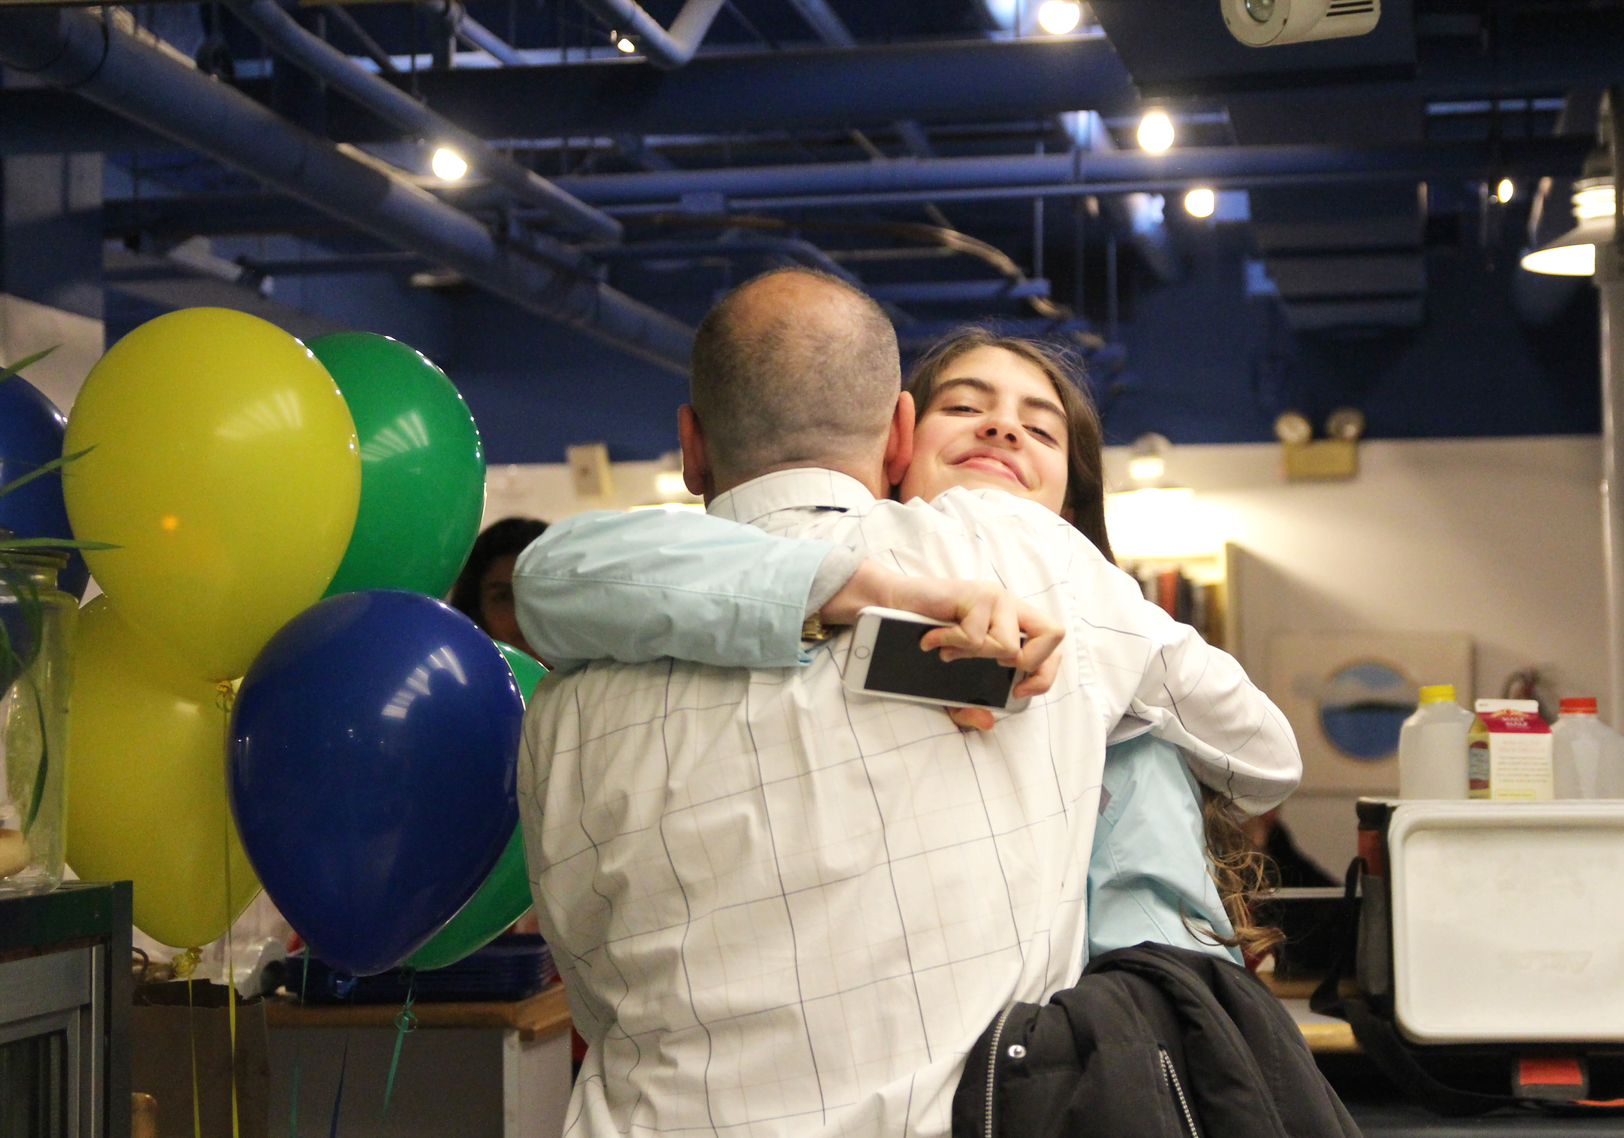 Aria Berger gives Ailton Sousa a hug on his last day operating Elton's Cafe. March 23, 2019 Photo: Leslie Yager